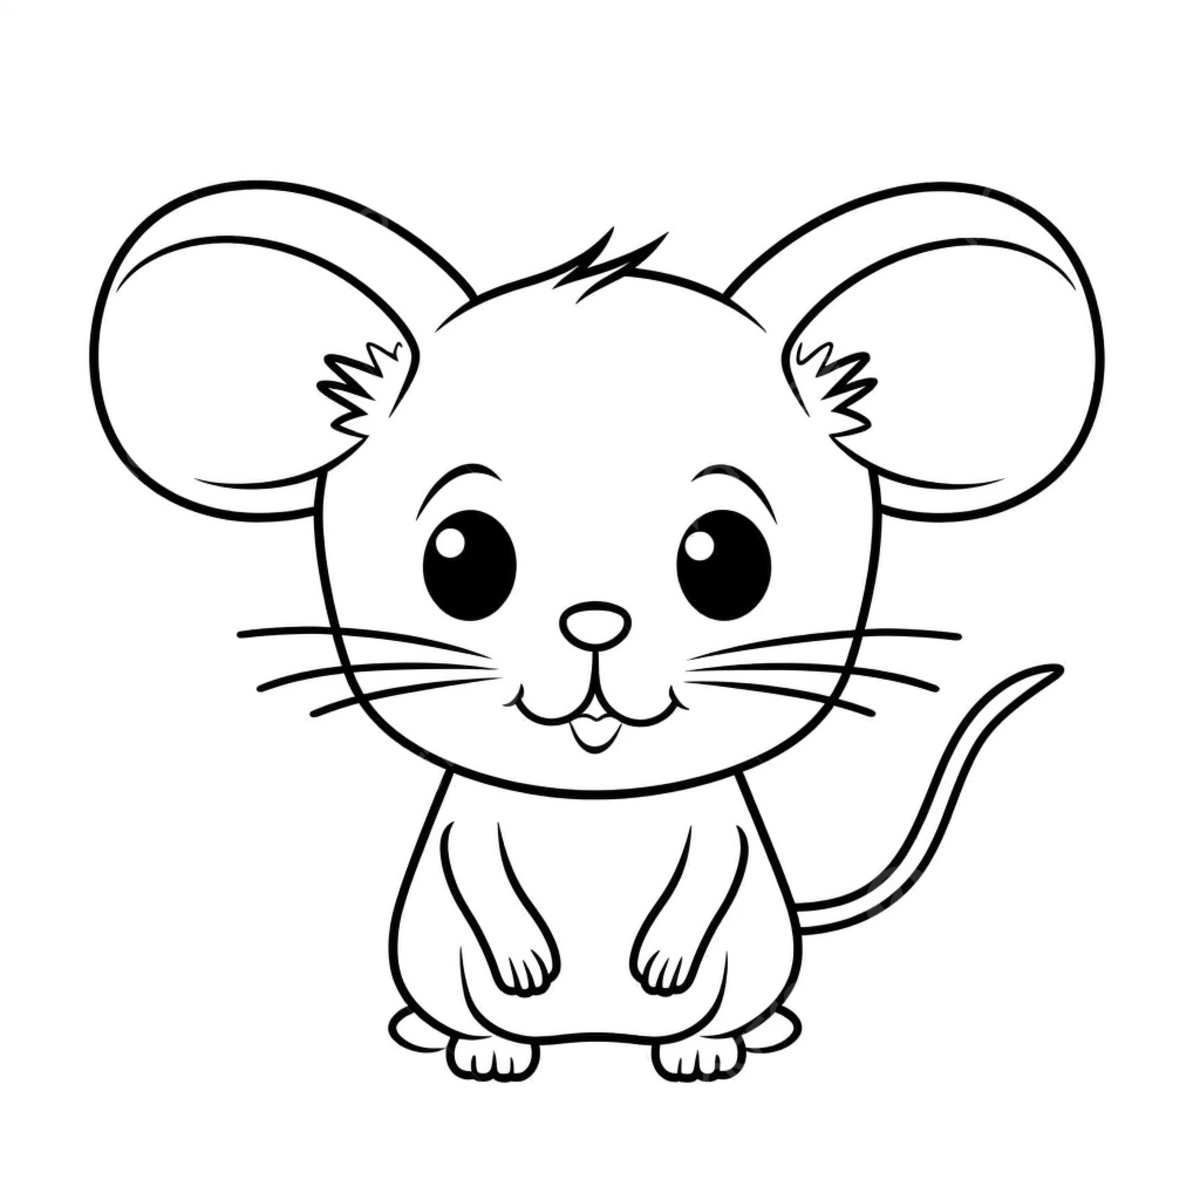 Cute mouse coloring page on a white background mouse drawing ring drawing color drawing png transparent image and clipart for free download